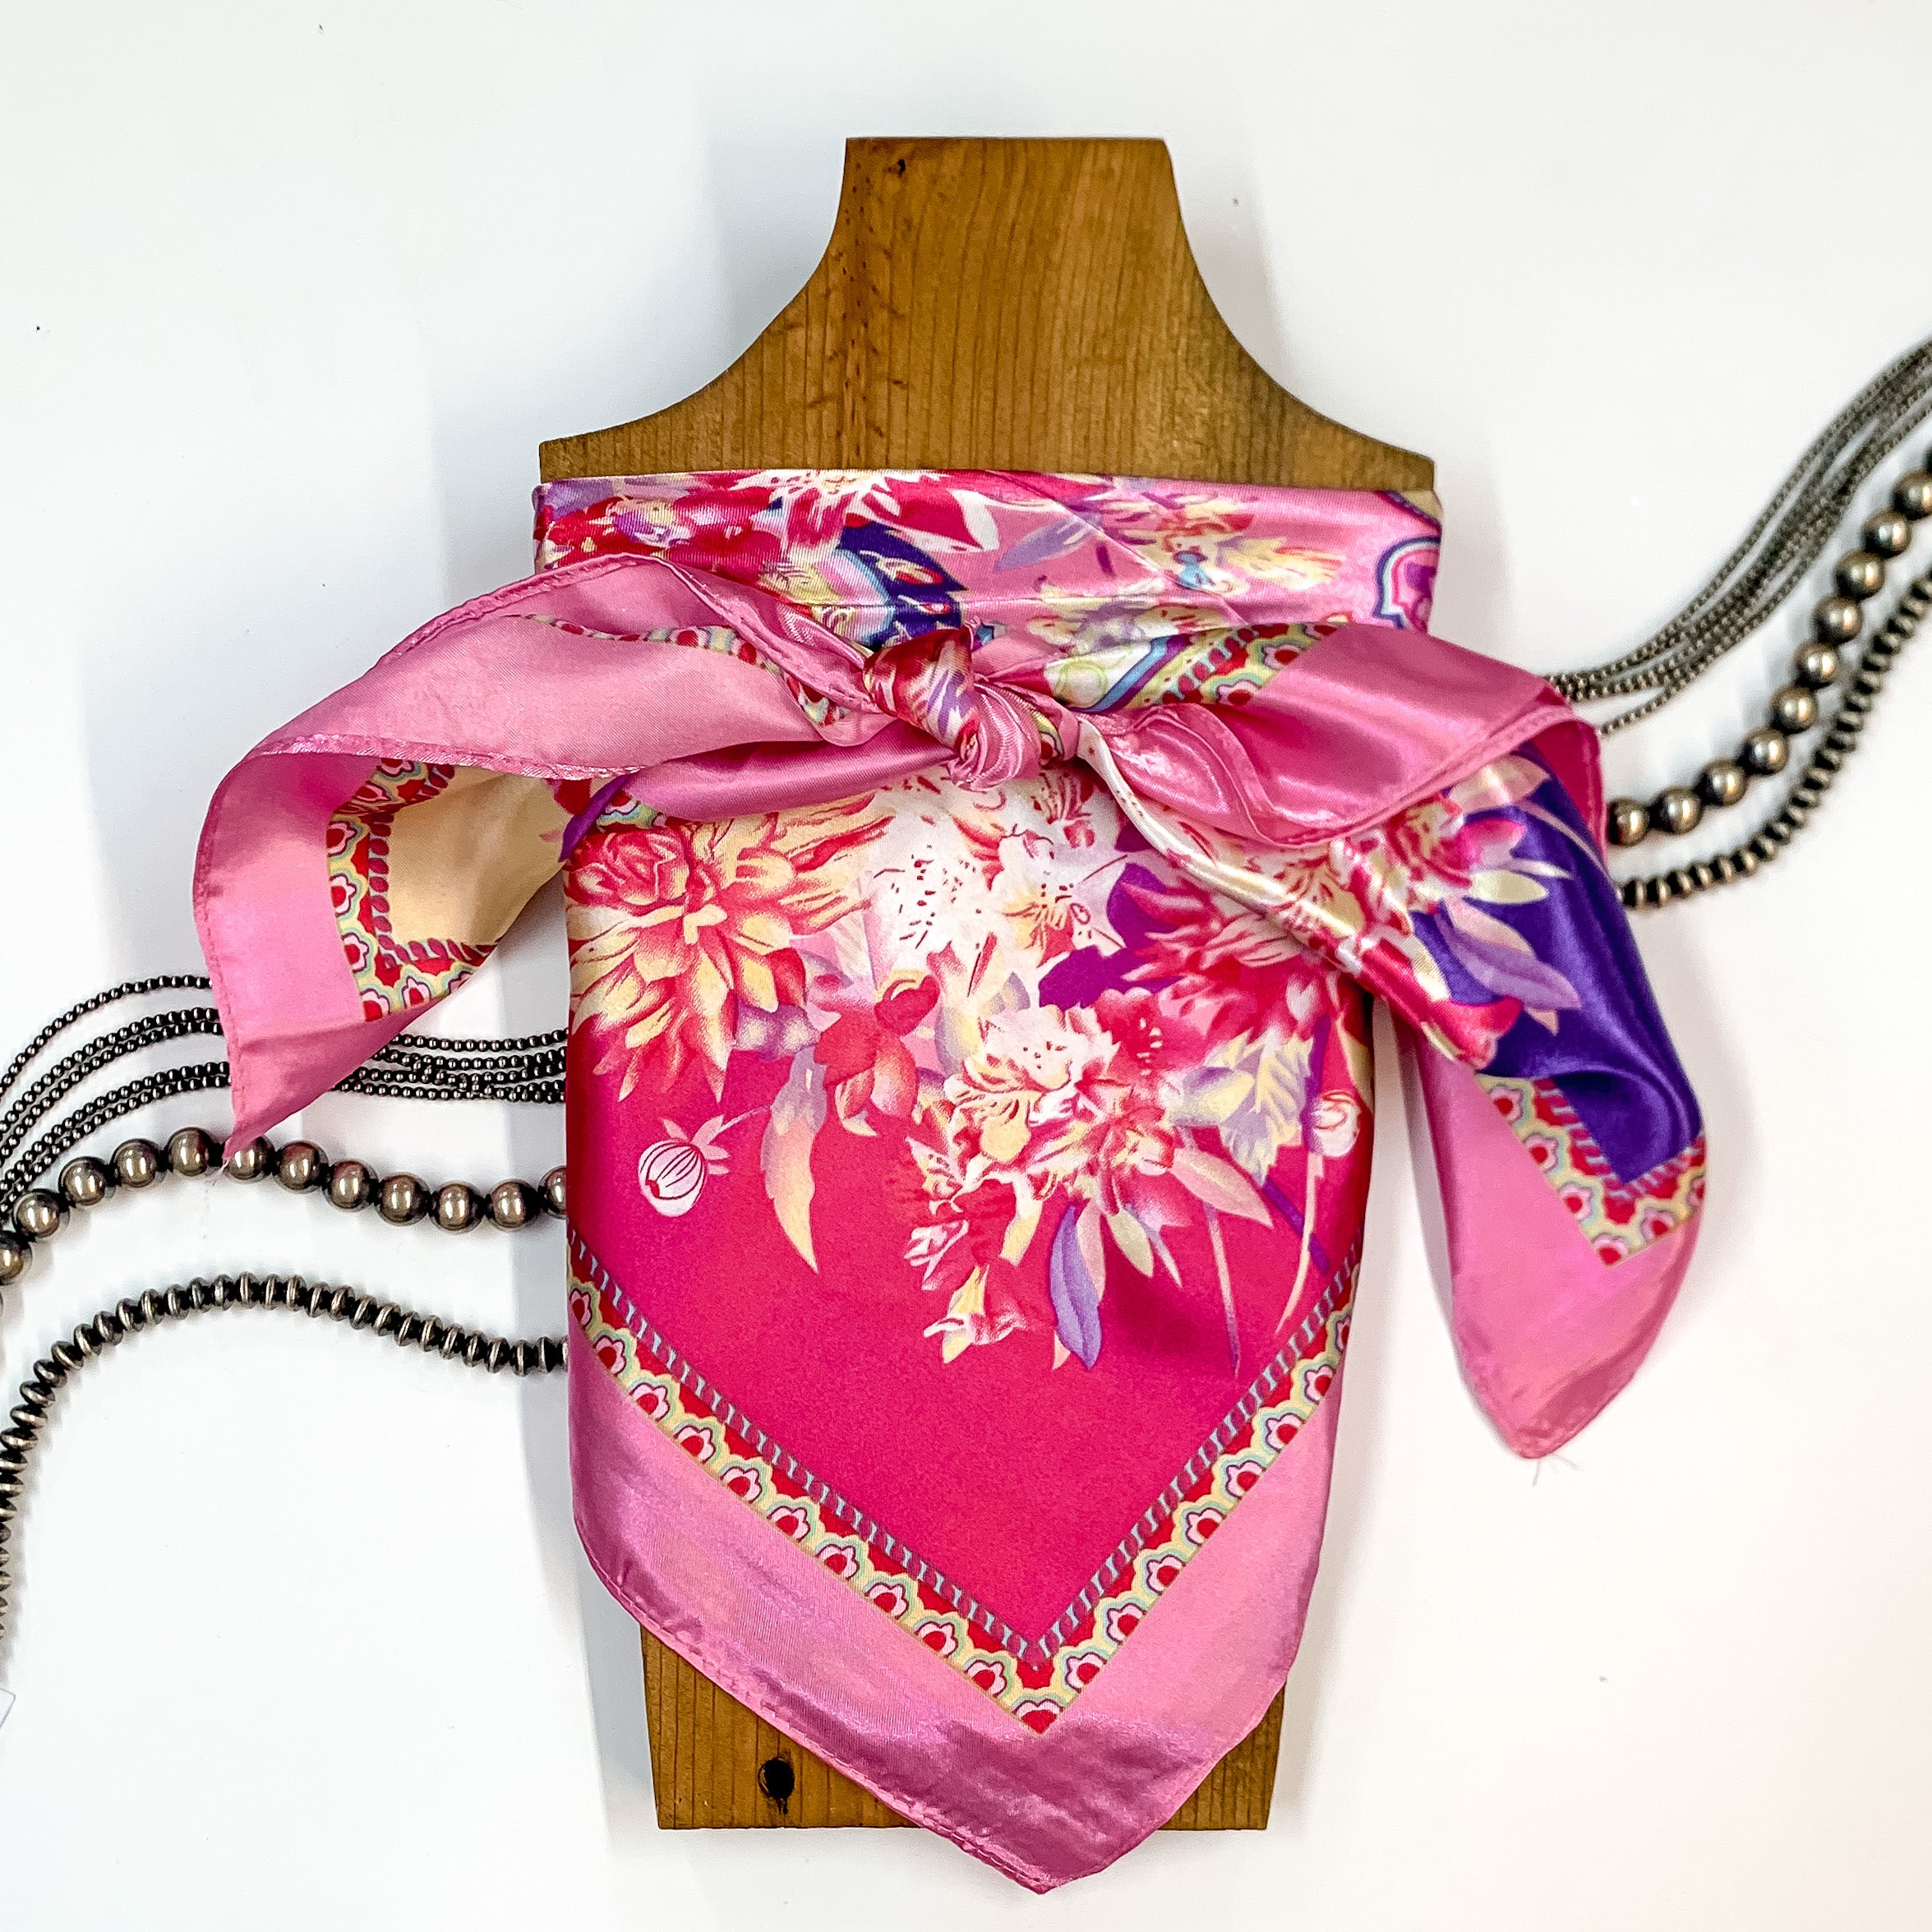 Patterned scarf in Desert Petals. Scarf is tied around a wooden piece. The scarf and piece of wood is pictured on a white background with Navajo jewelry spread out around it.